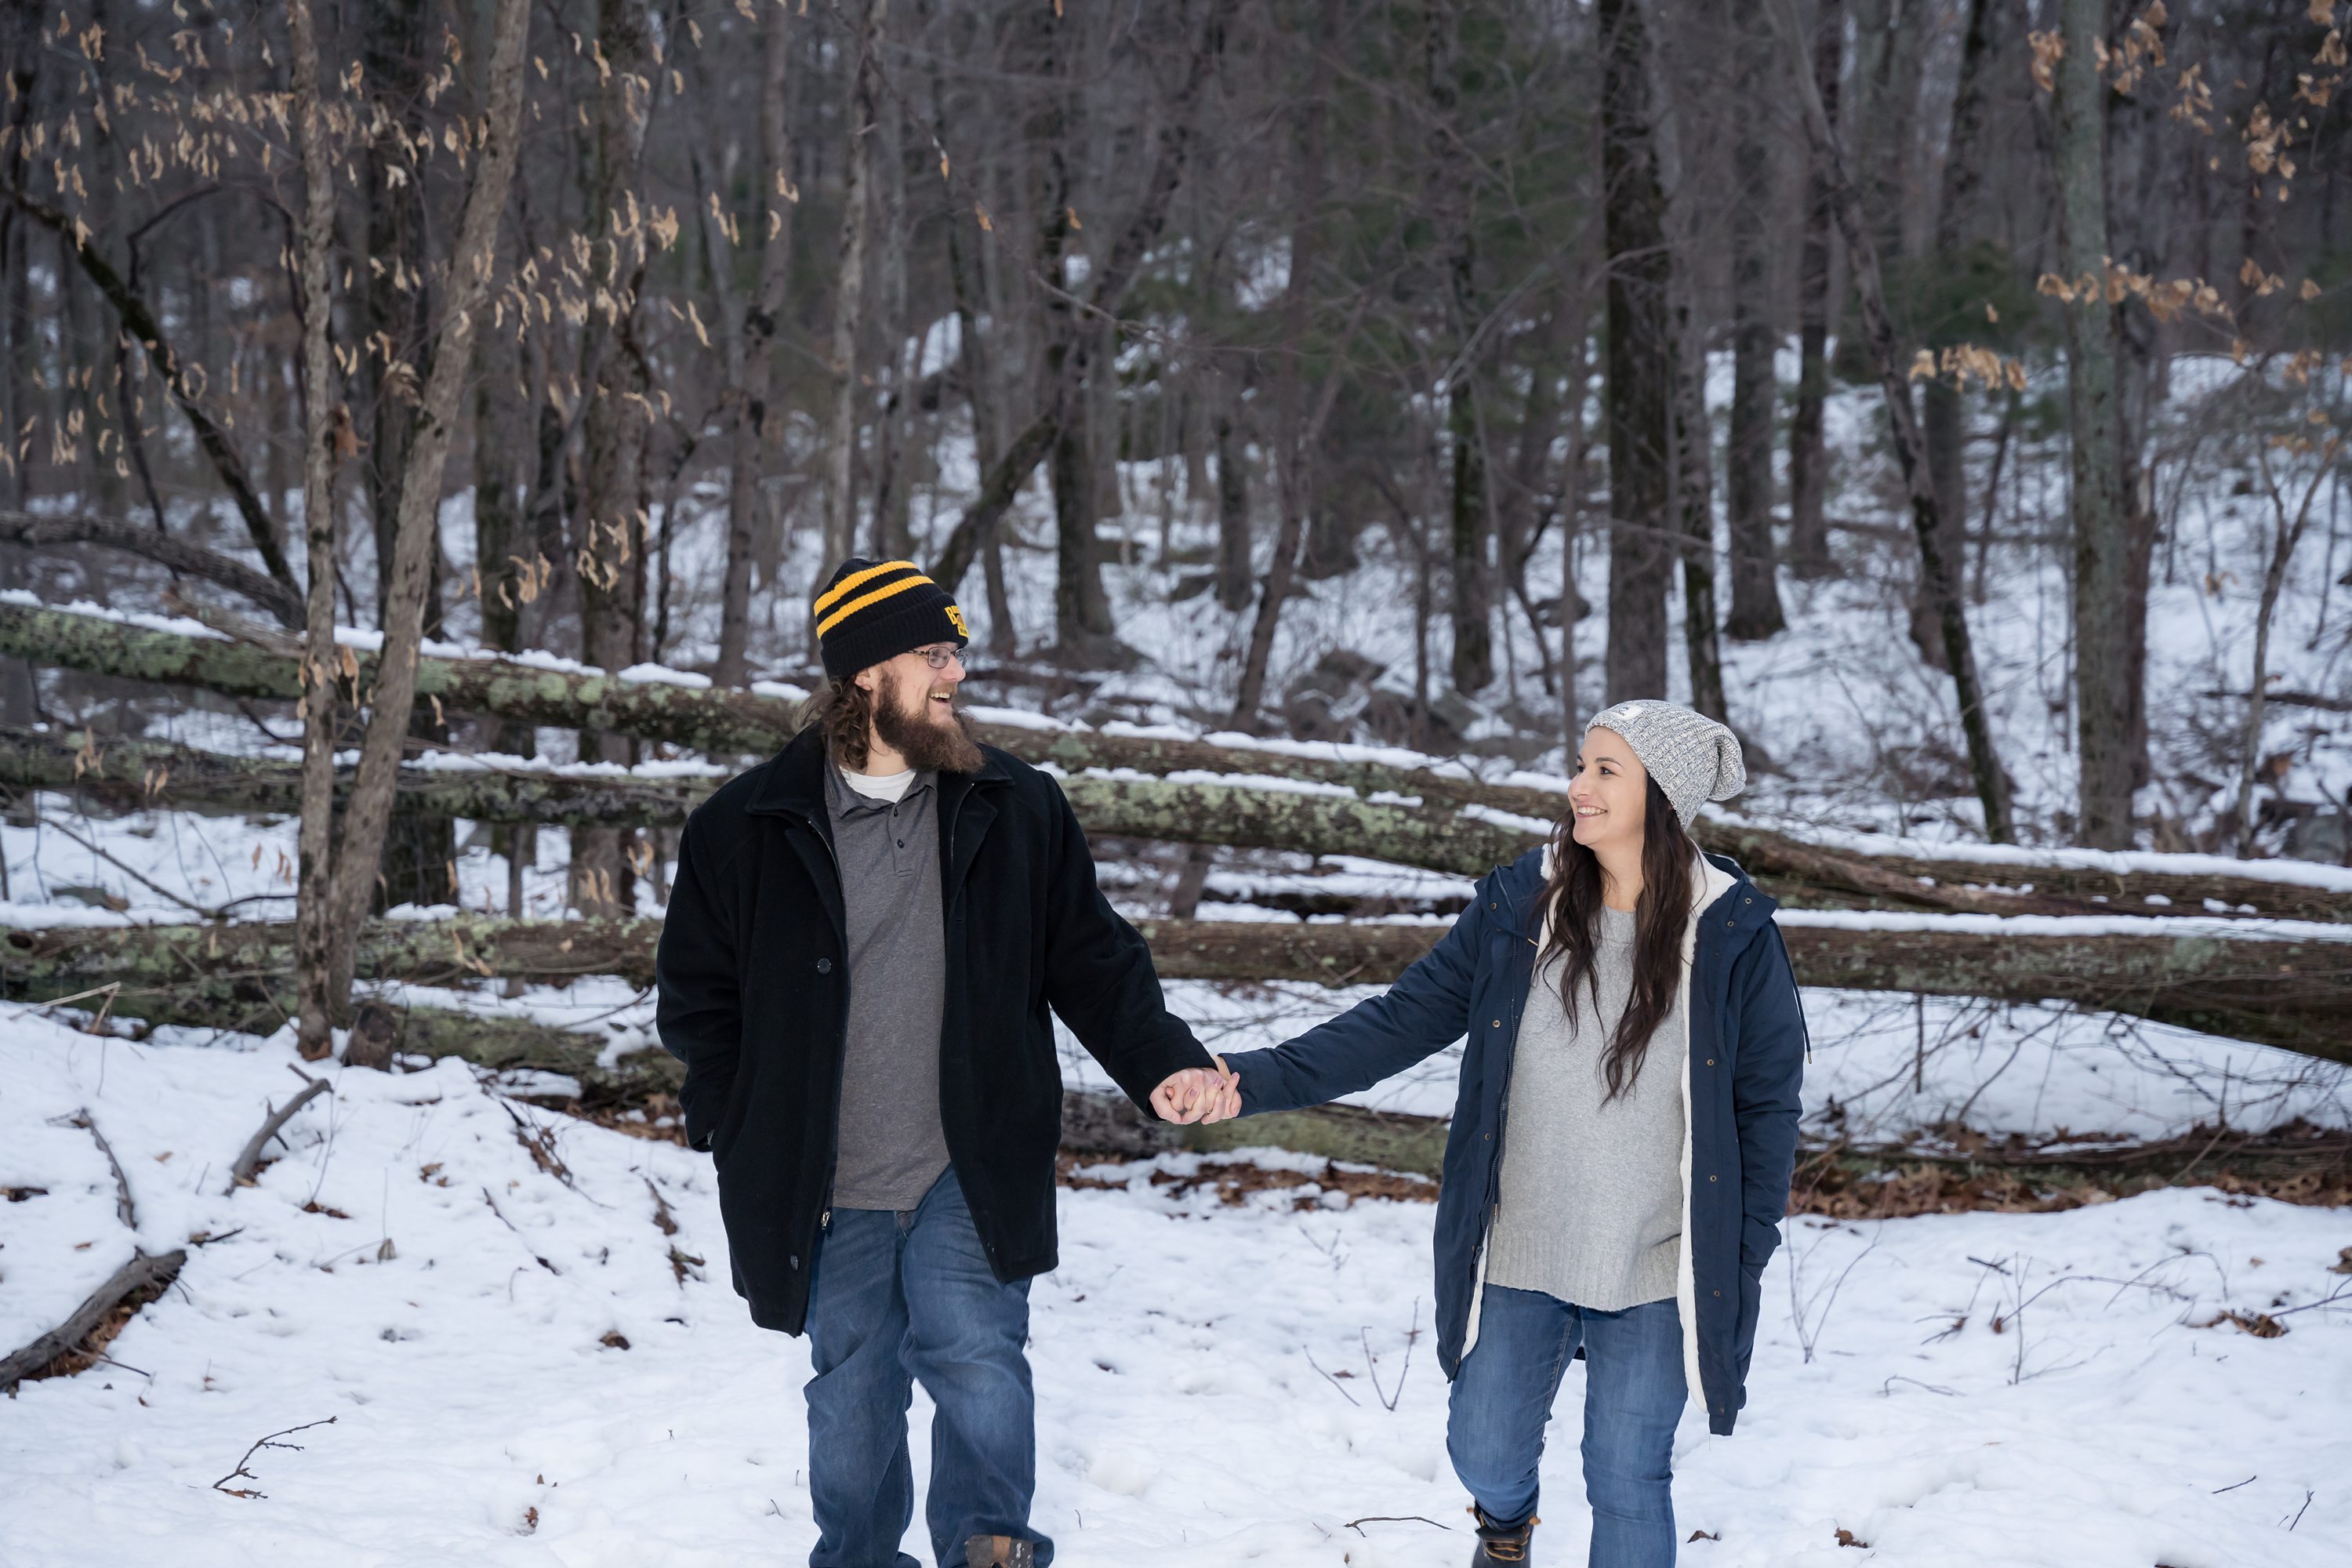 Sharon Wedding Photographer,Providence Wedding Photographer,Fun in the Snow at Engagement Session